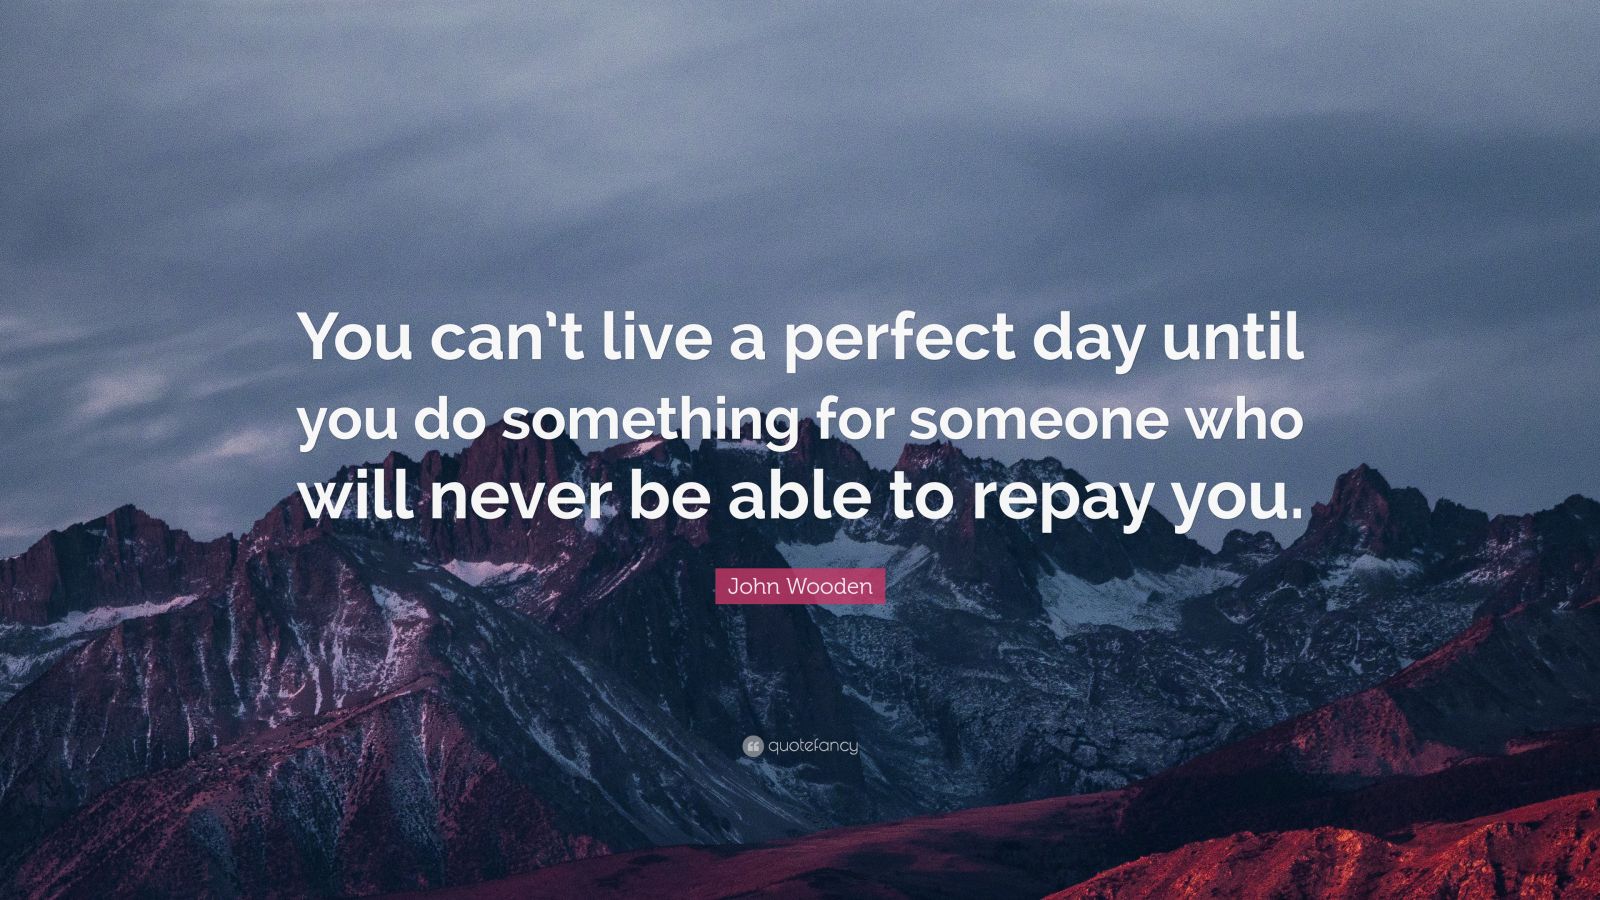 John Wooden Quote: “You can’t live a perfect day until you do something